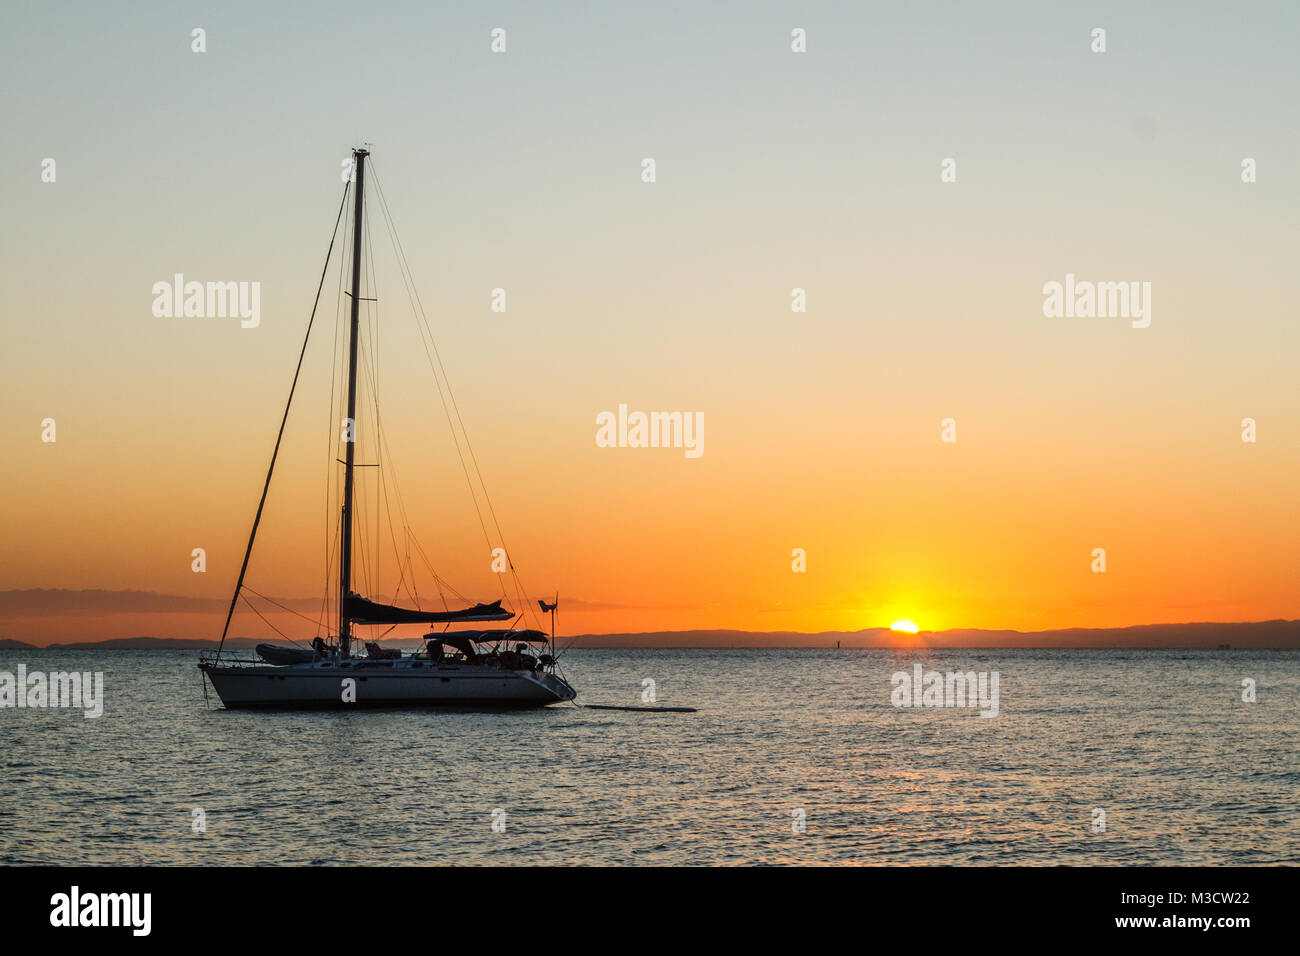 Silhouette of yacht at sunset at Moreton Bay, Queensland, Australia Stock Photo